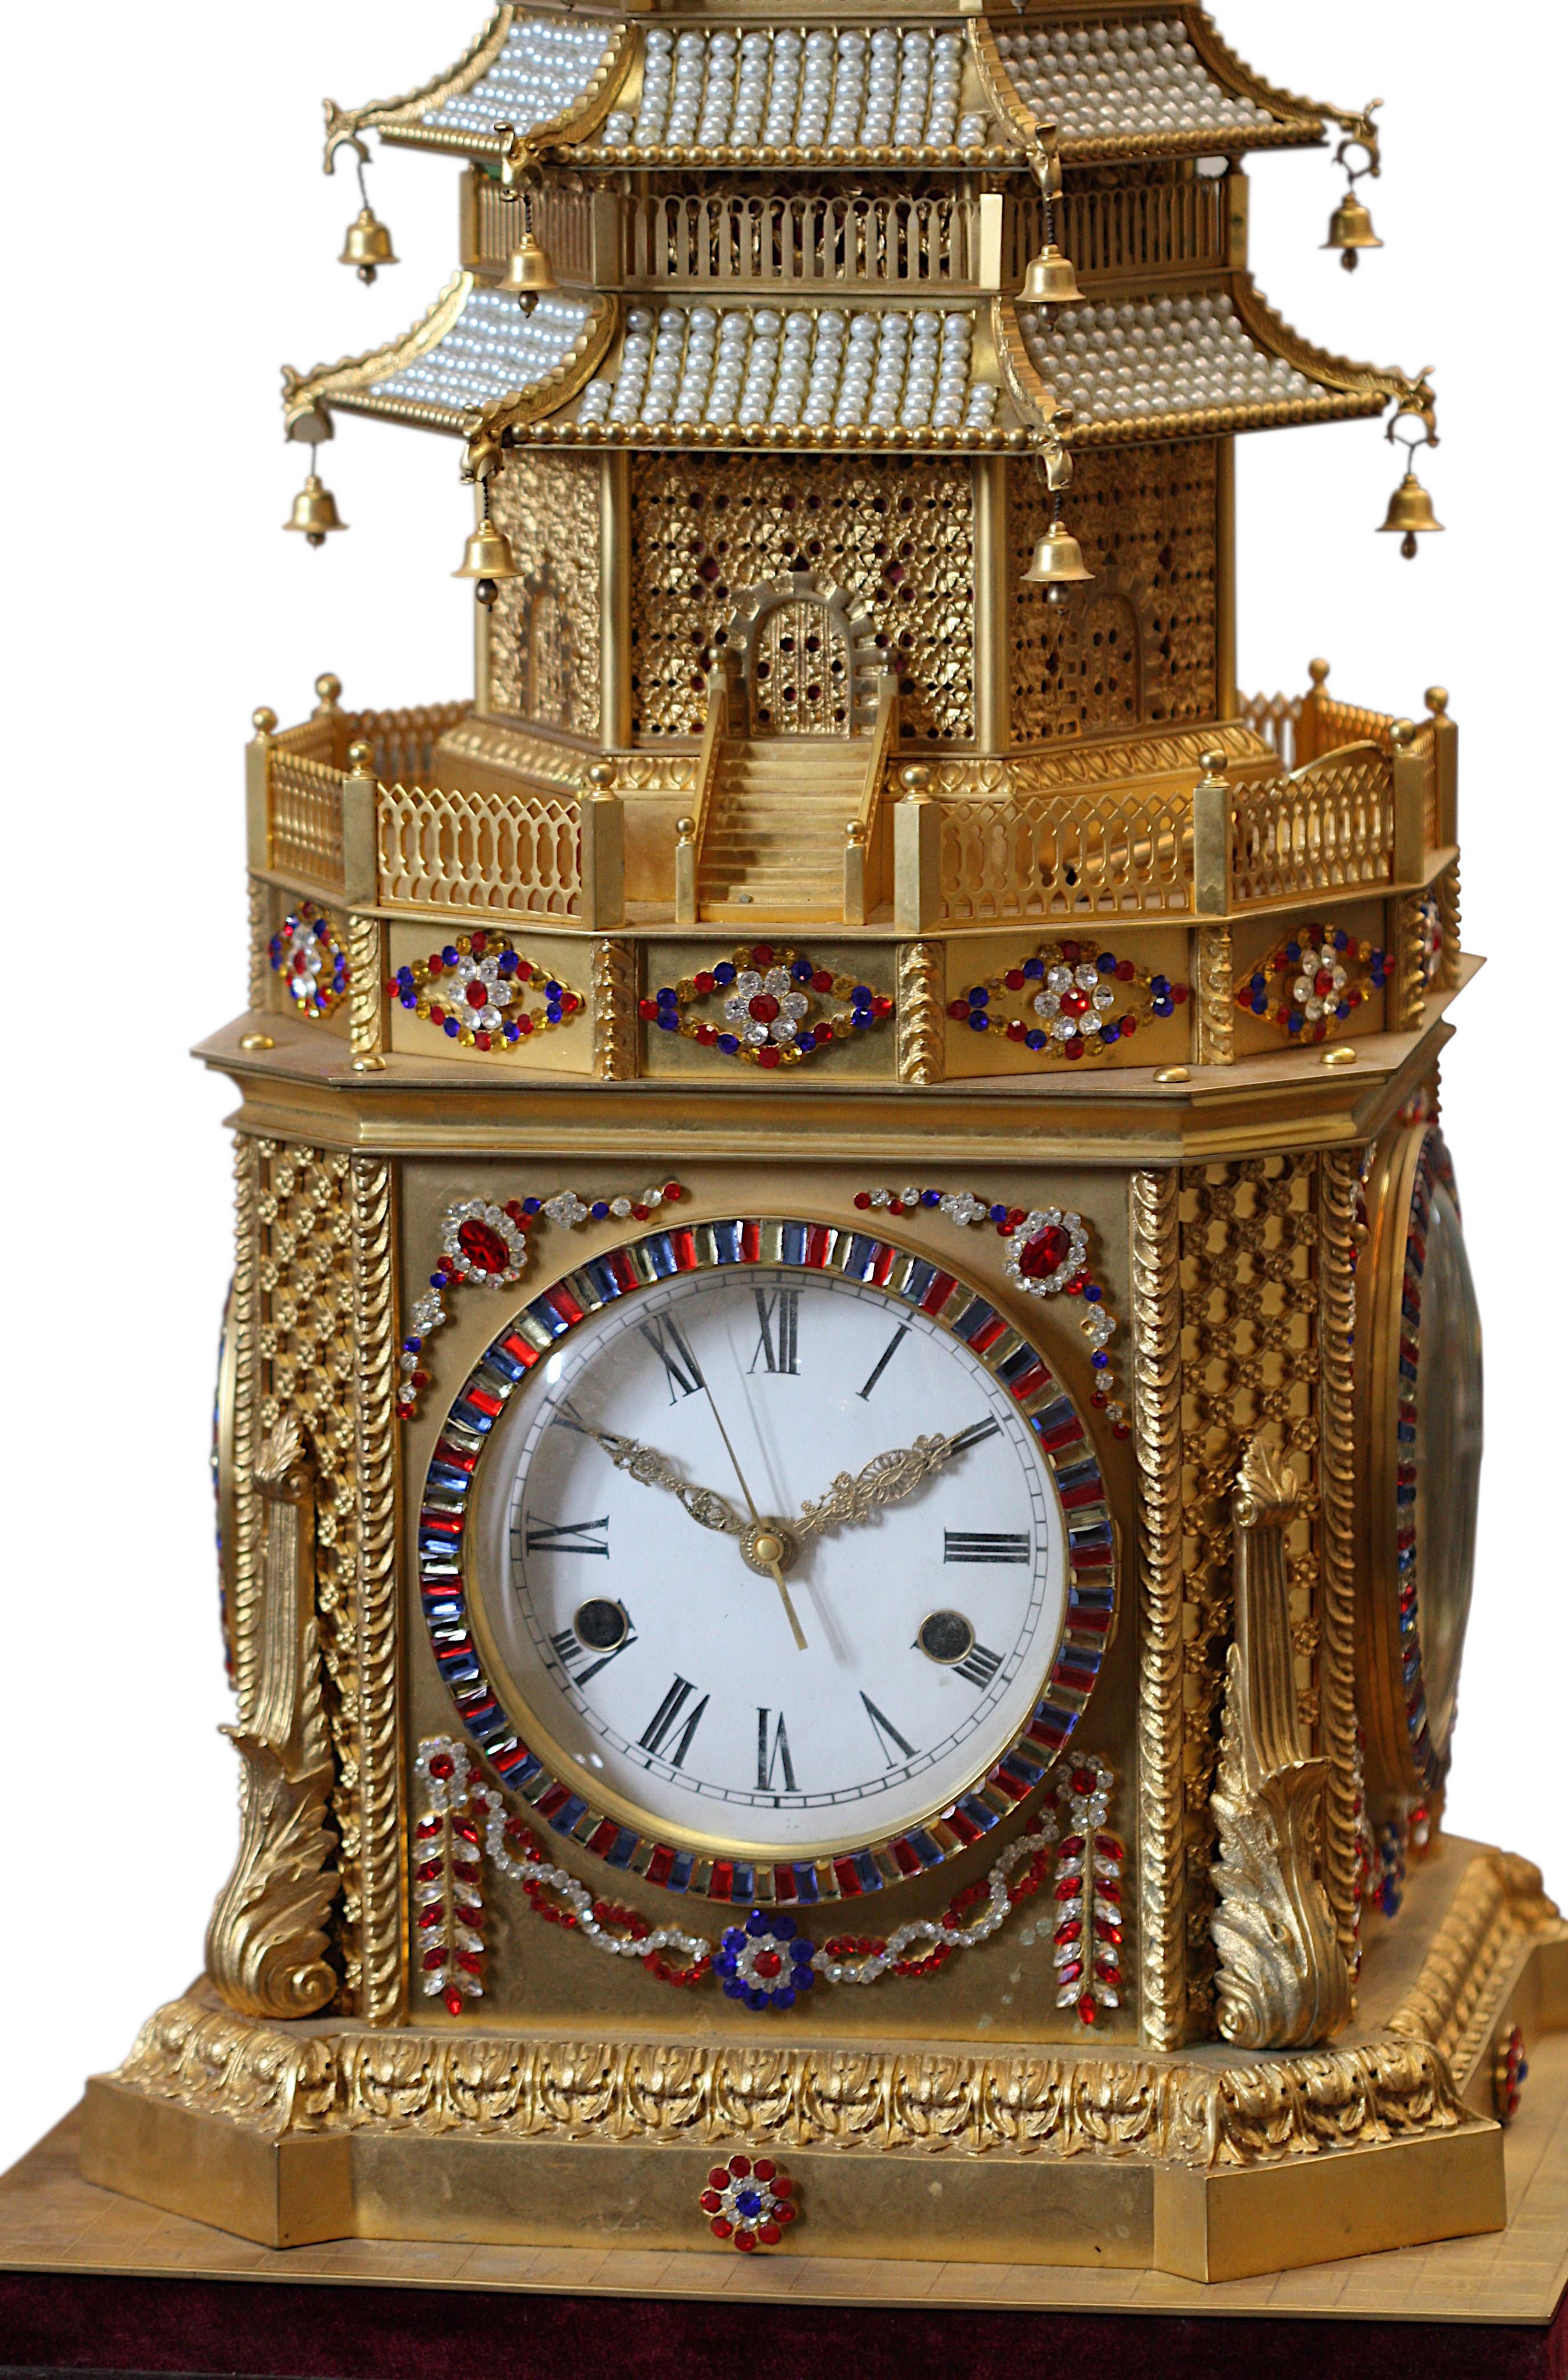 A George III style gilt-bronze musical automaton clock probably made for the Chinese market, of spreading hexagonal form with eight gabled and foliate-pierced tiers hung with bells, color paste set jewels and pearl studded roof tops, measure 92 cm,